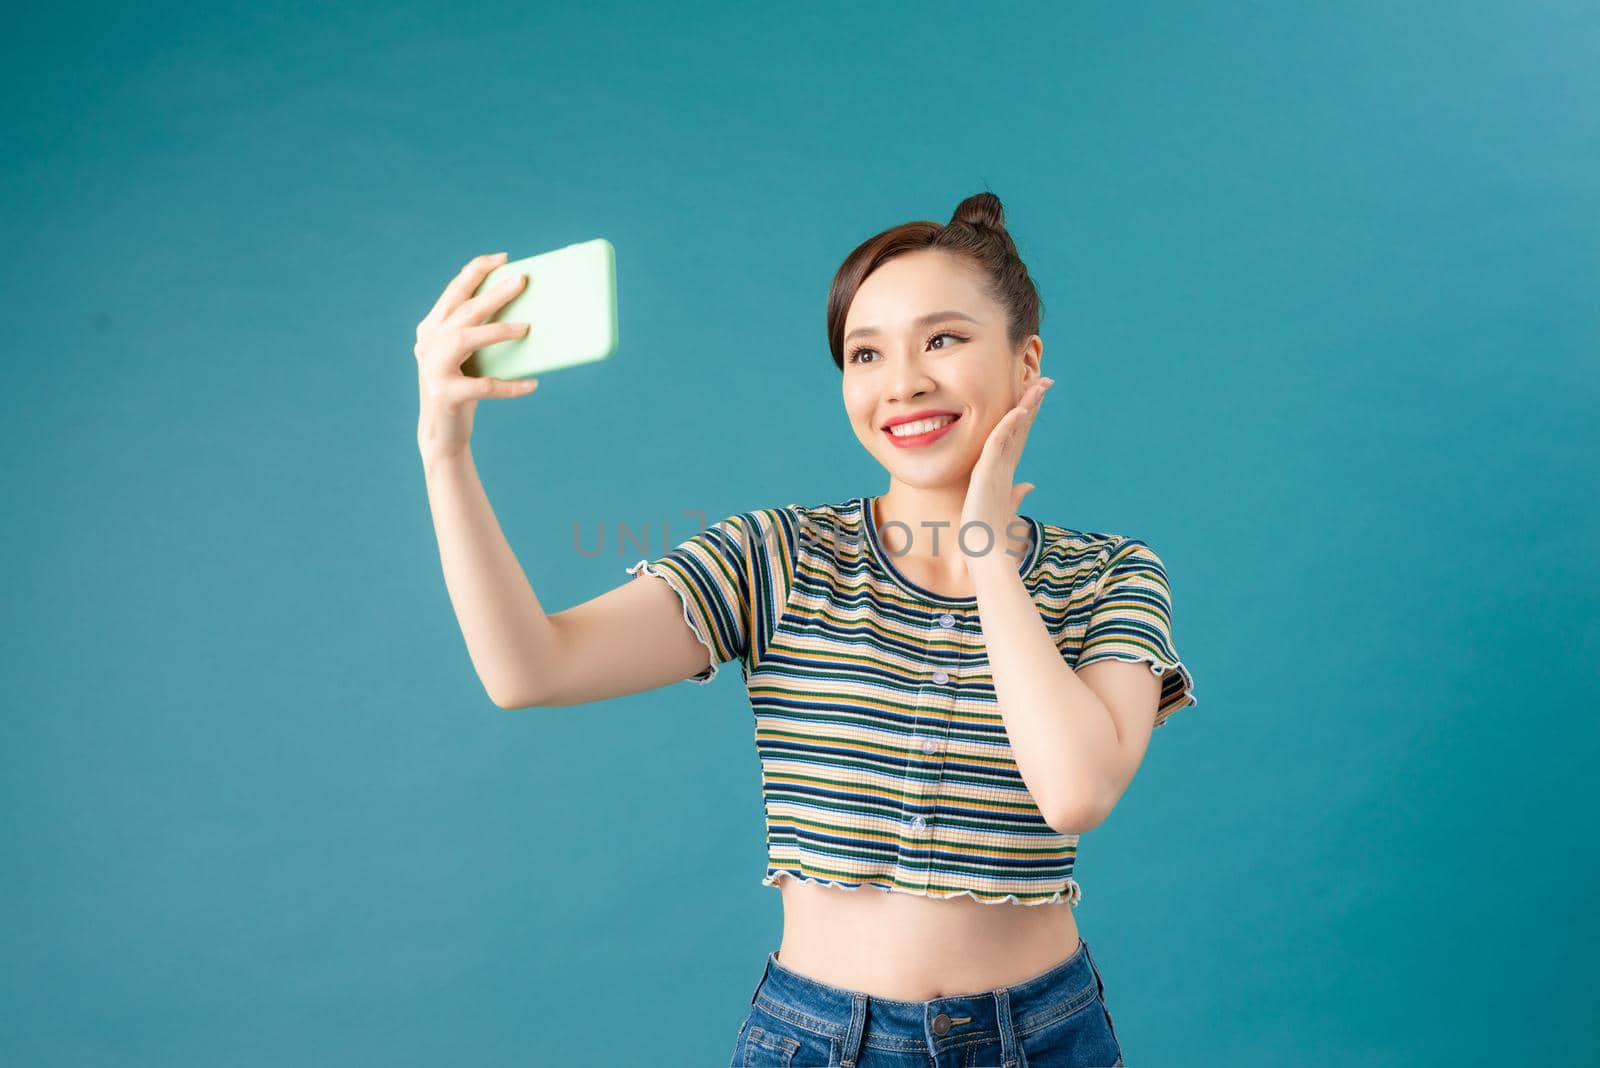 Smiling woman making selfie photo on smartphone over blue background